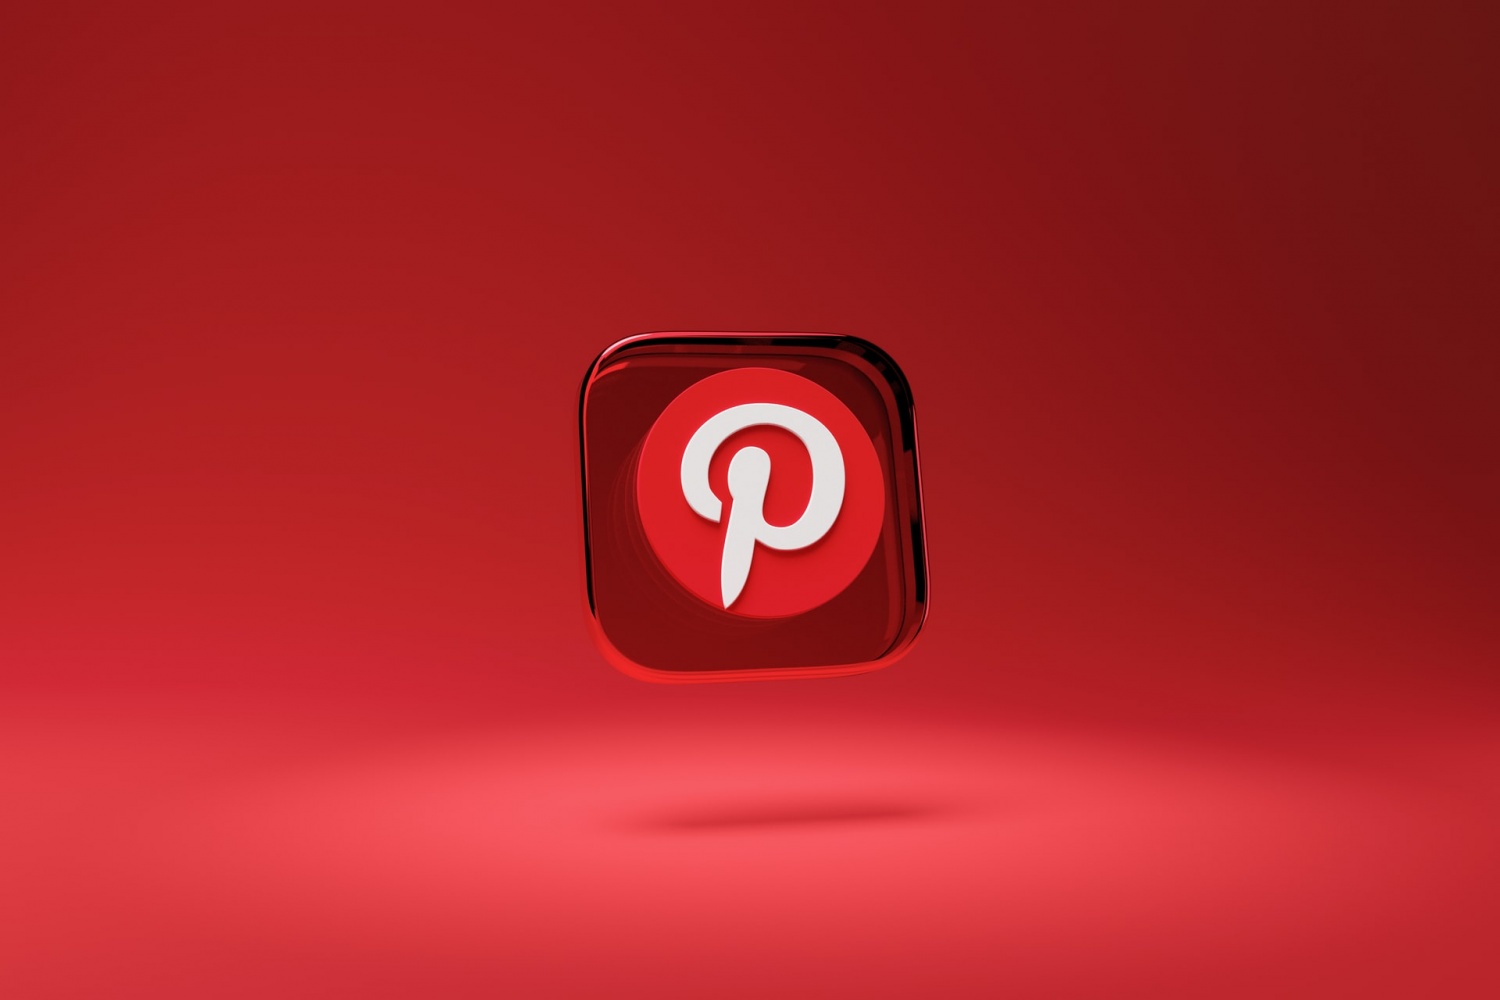 Pinterest Stock Grew by 28% Following Q4 Earnings and Sales Beating Wall Street Expectations